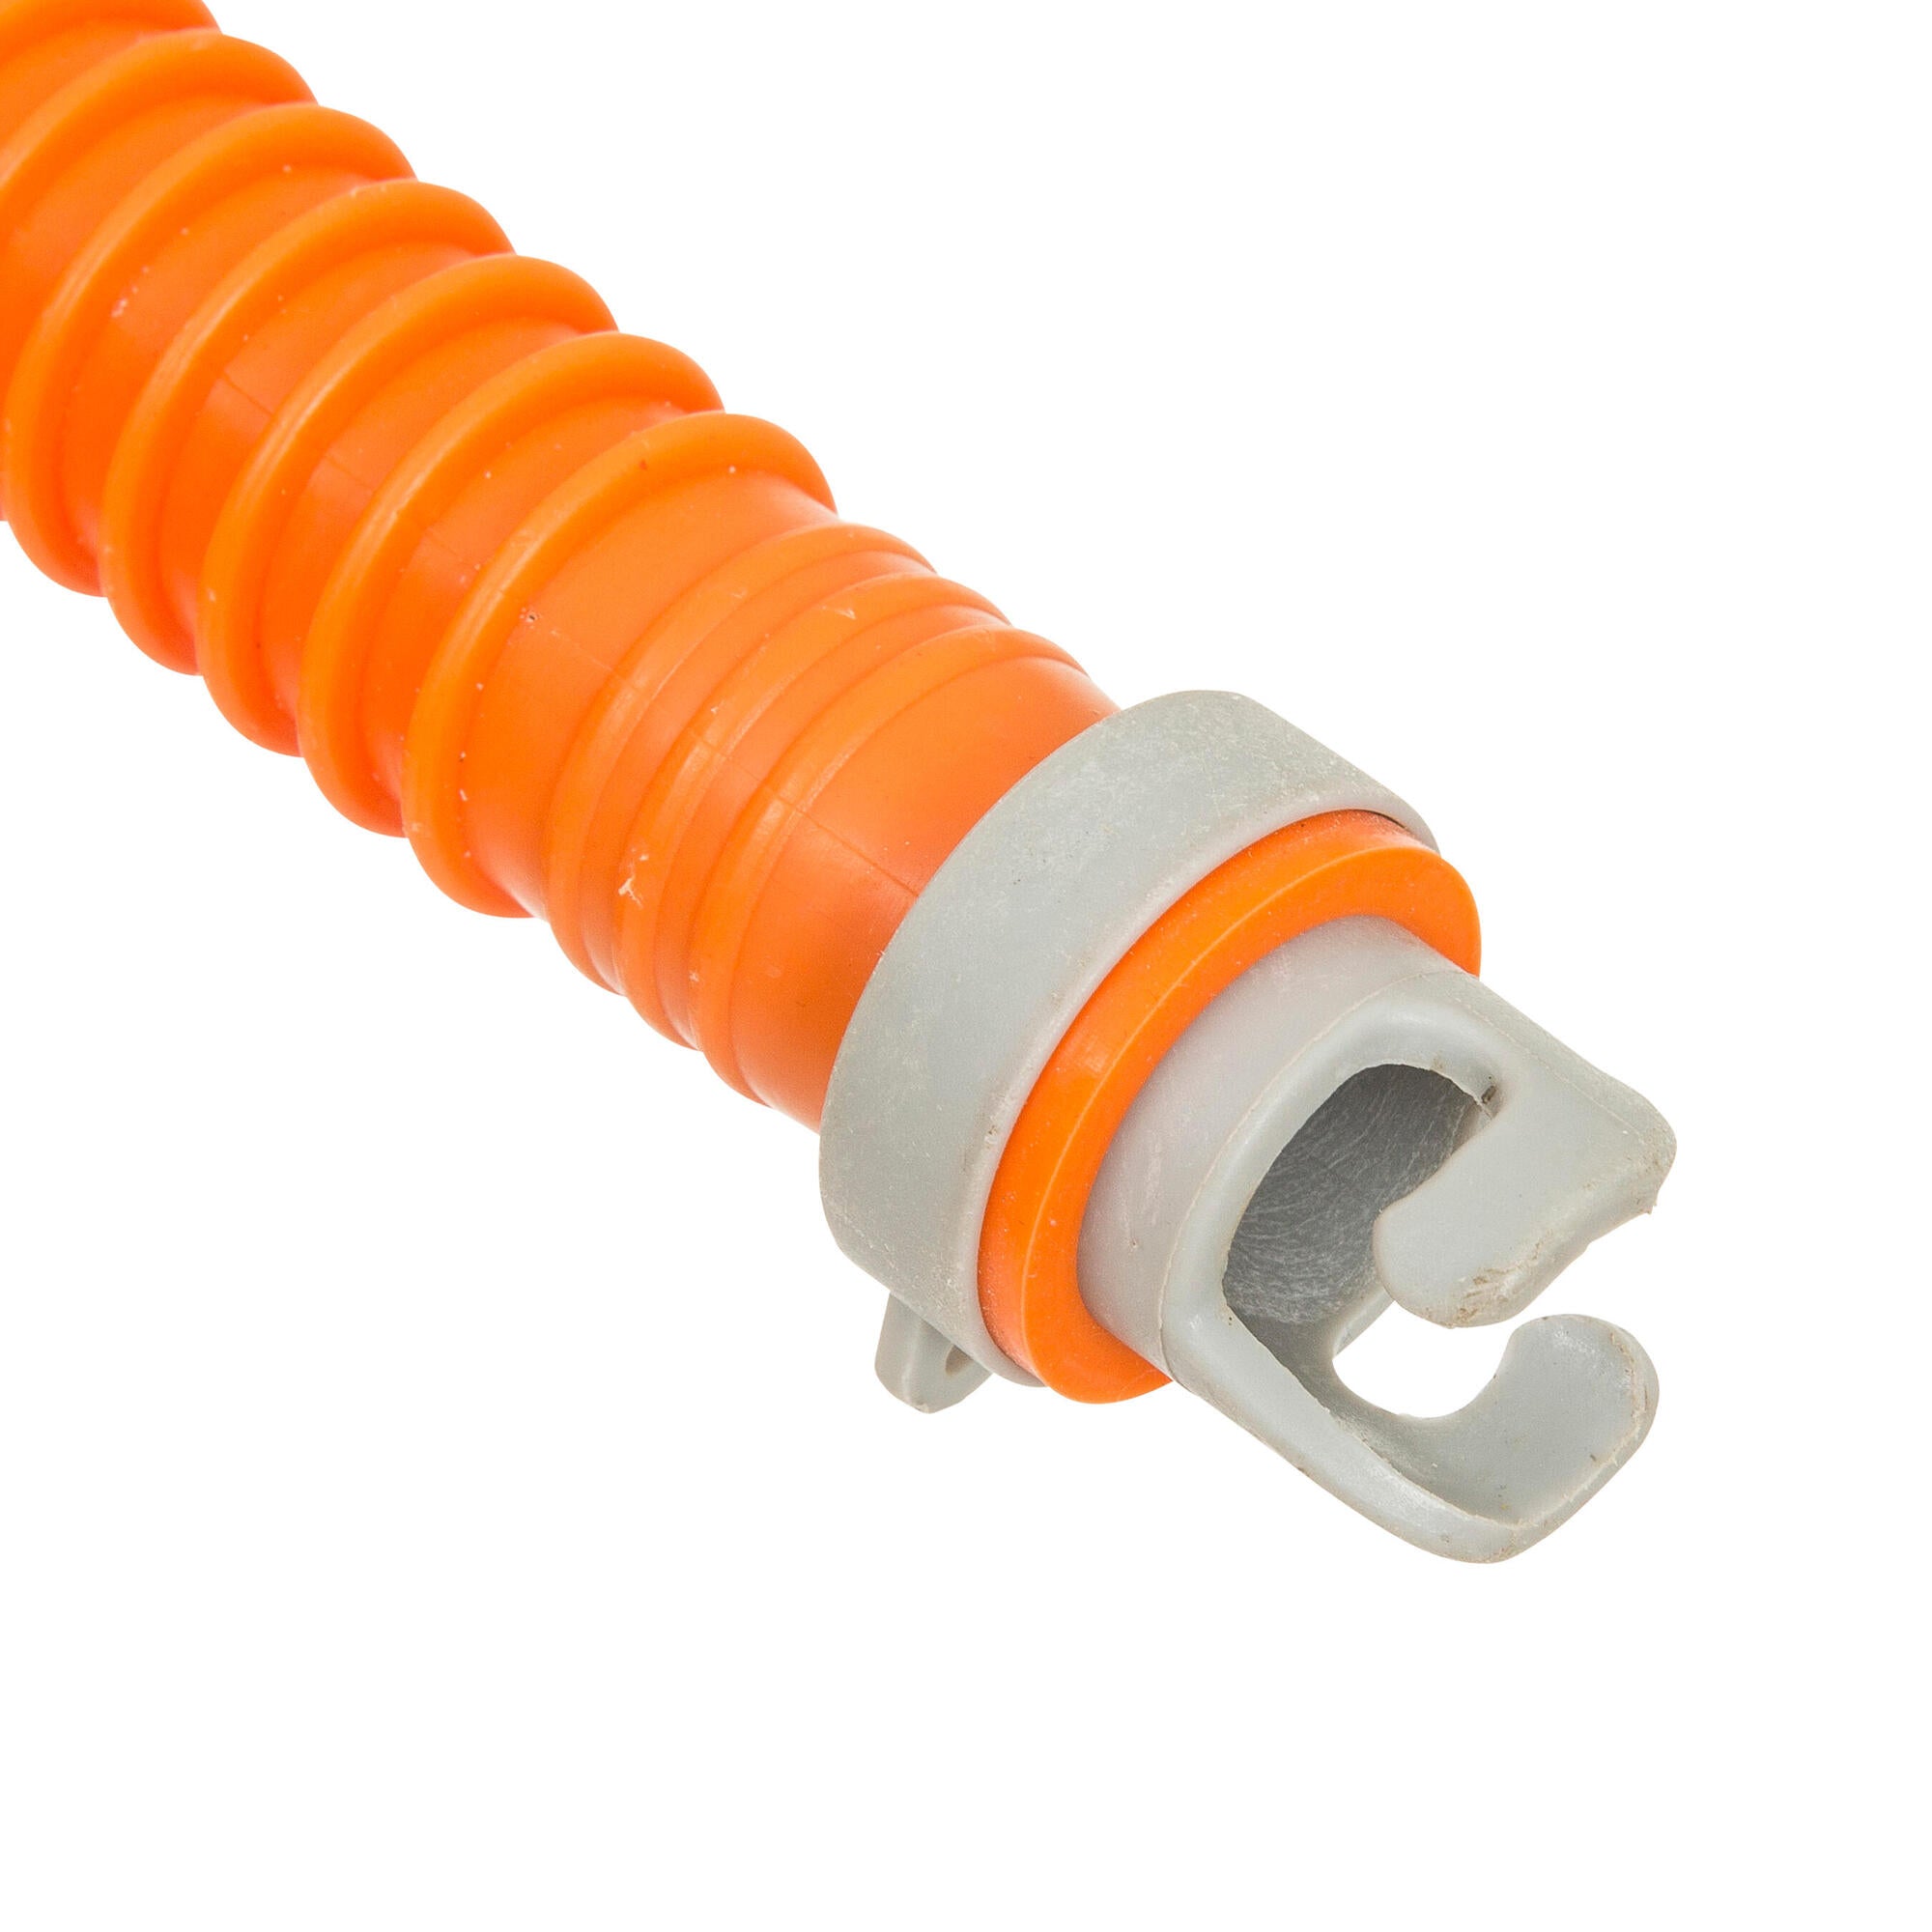 Itiwit Hose for High-Pressure Dual- and Triple-Action Orange and Black Pumps in Blood Orange